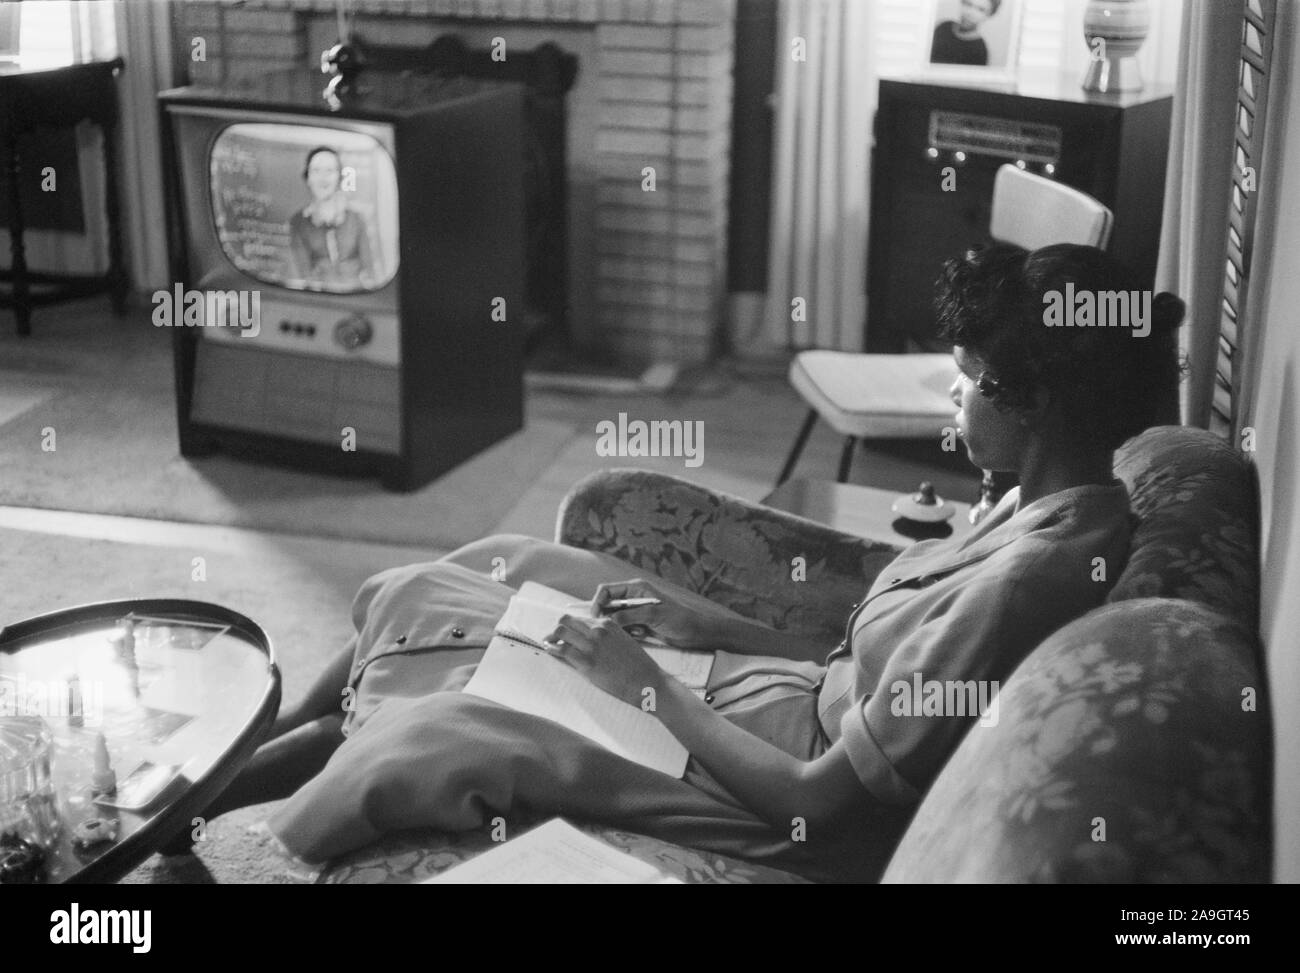 African-American High School Girl being Educated via Television during period that Schools were Closed to Avoid Integration, Little Rock, Arkansas, USA, photograph by Thomas J. O'Halloran, September 1958 Stock Photo